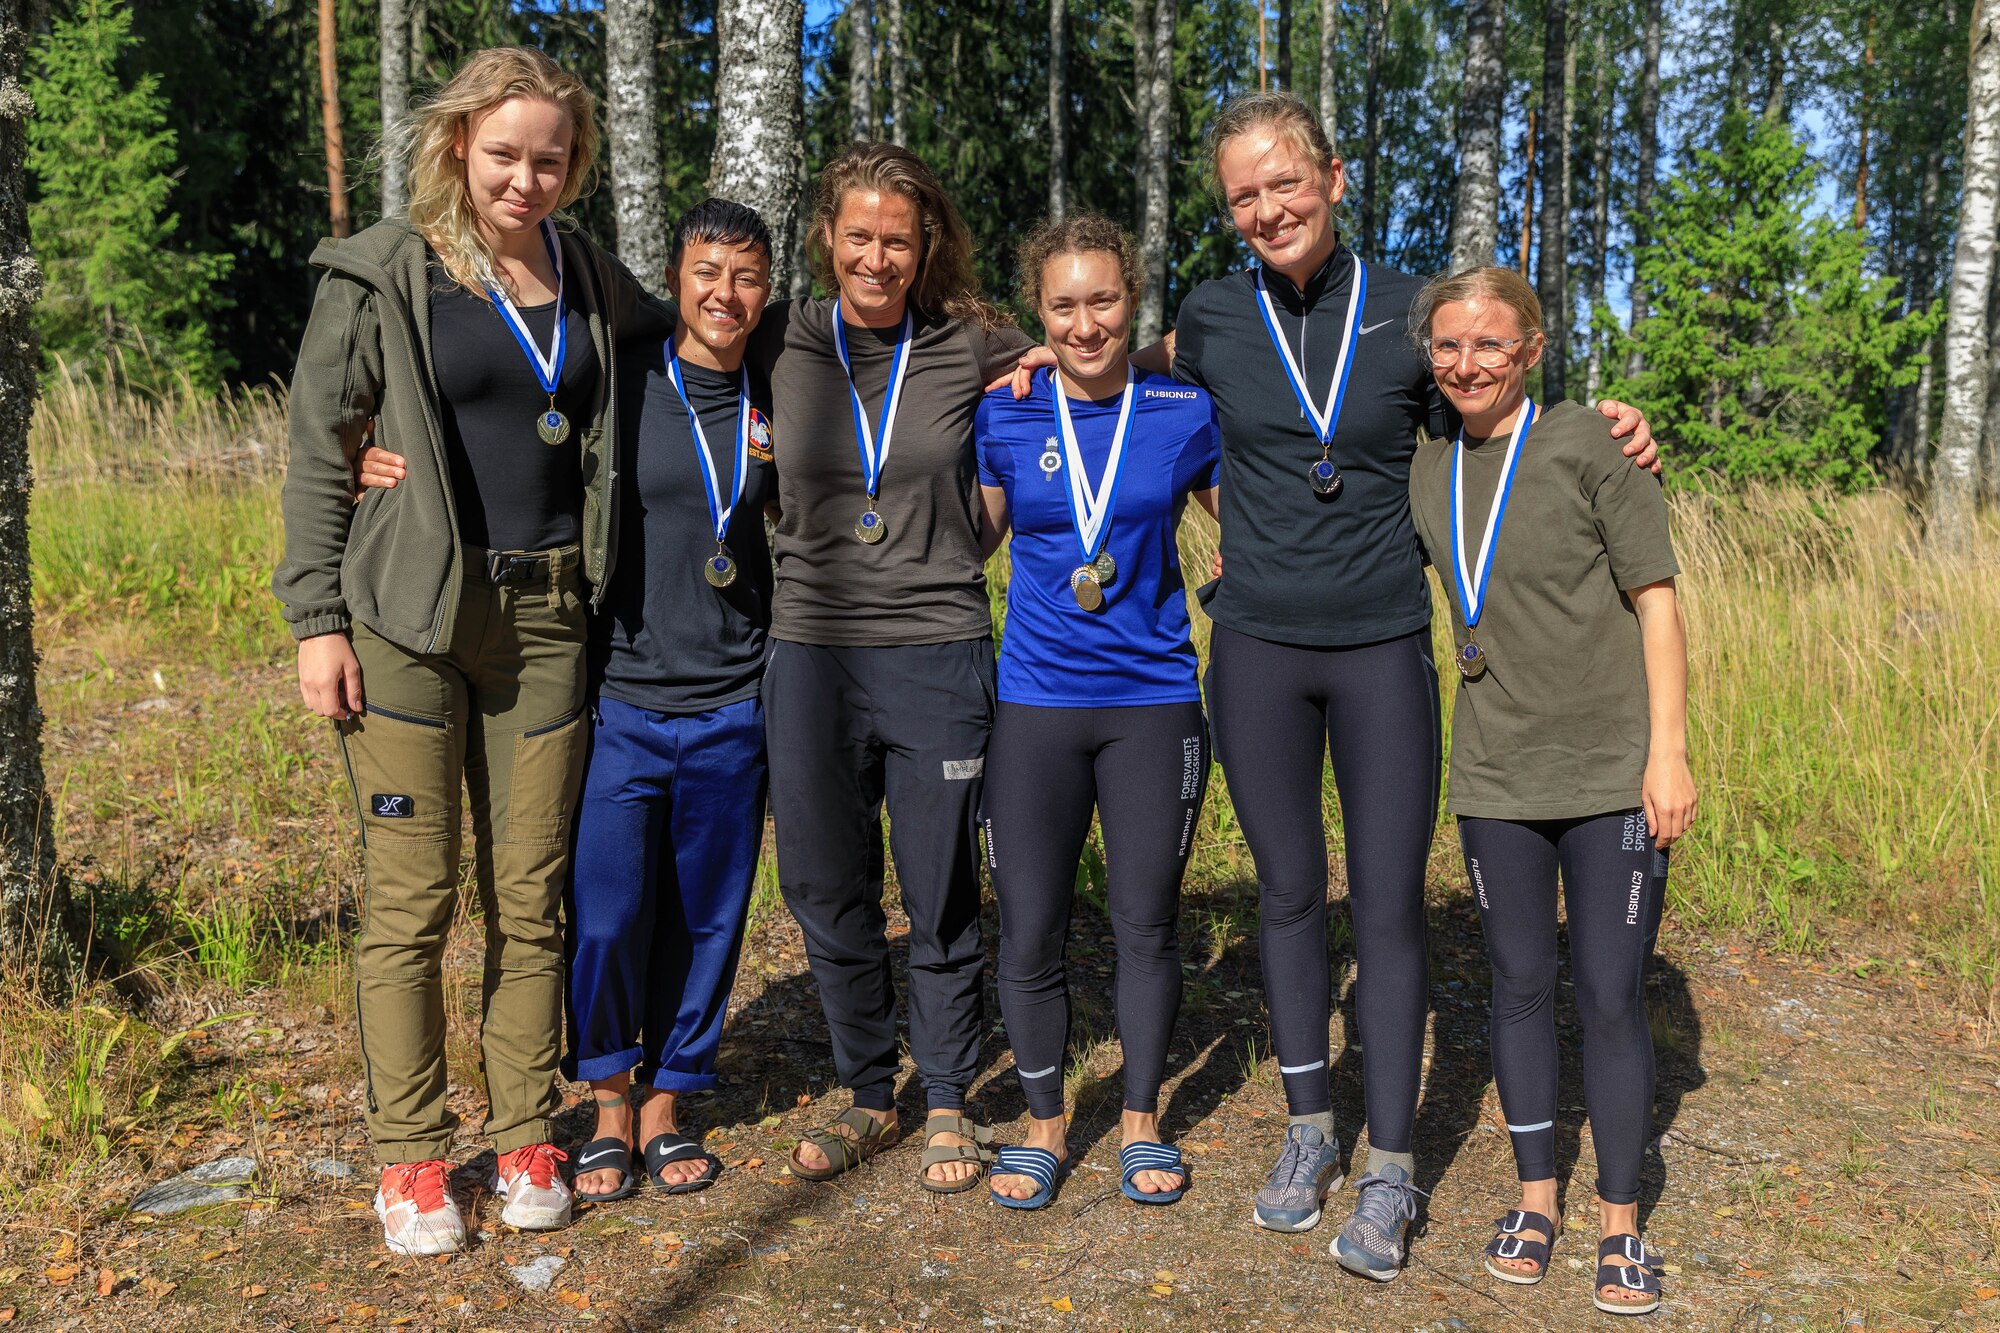 Female competitors pose with their medals earned during the Interallied Confederation of Reserve Officers military competition in Lahti, Finland on August 1st. The CIOR MILCOMP is an annual competition among NATO and Partnership for Peace nations. This competition test reserve service members from allied nations on several core disciplines in teams of three.